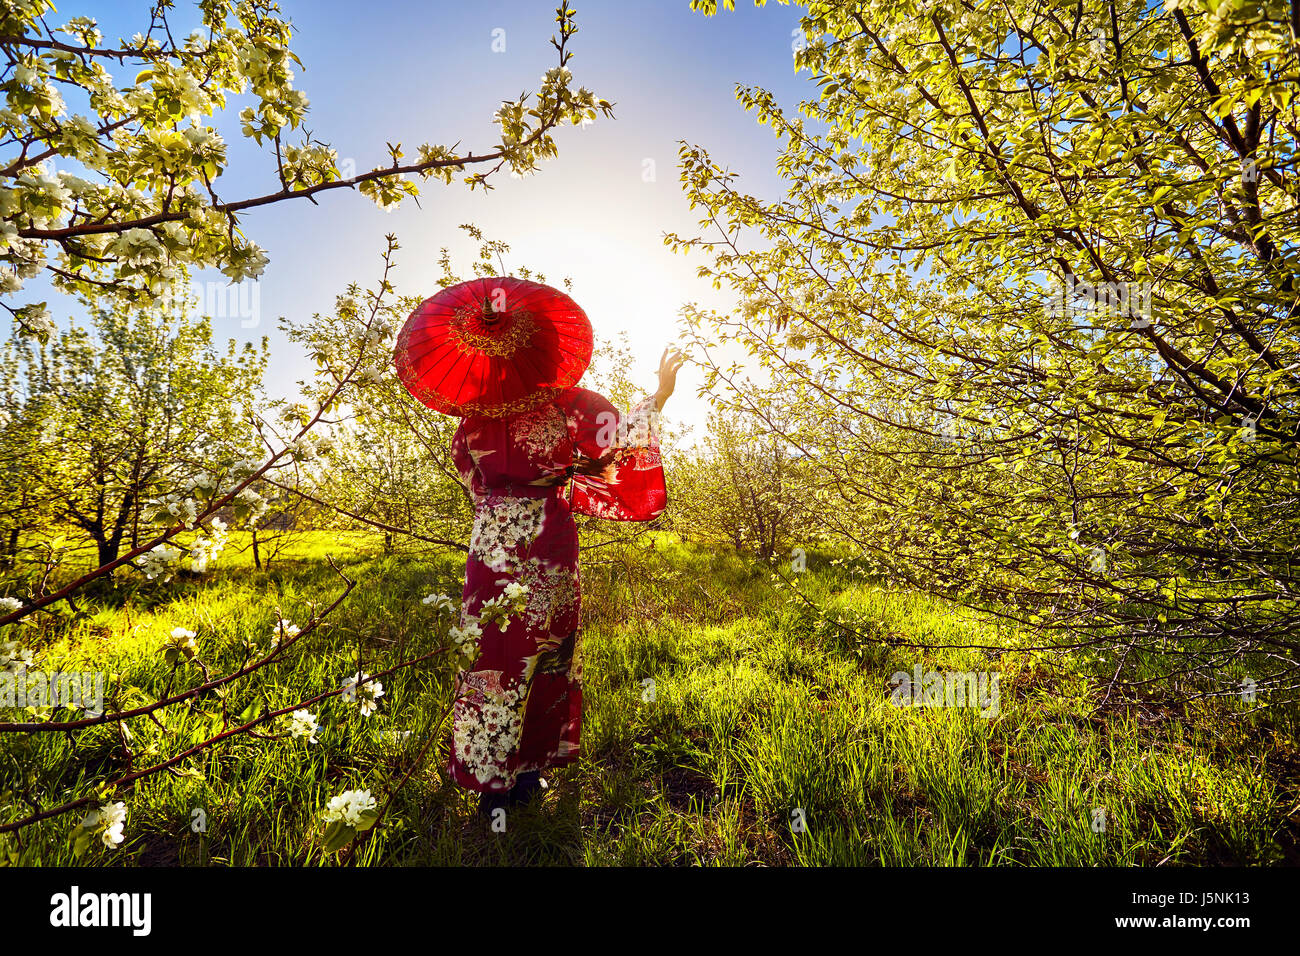 Woman in kimono with red umbrella in the garden with cherry blossom at sunrise Stock Photo